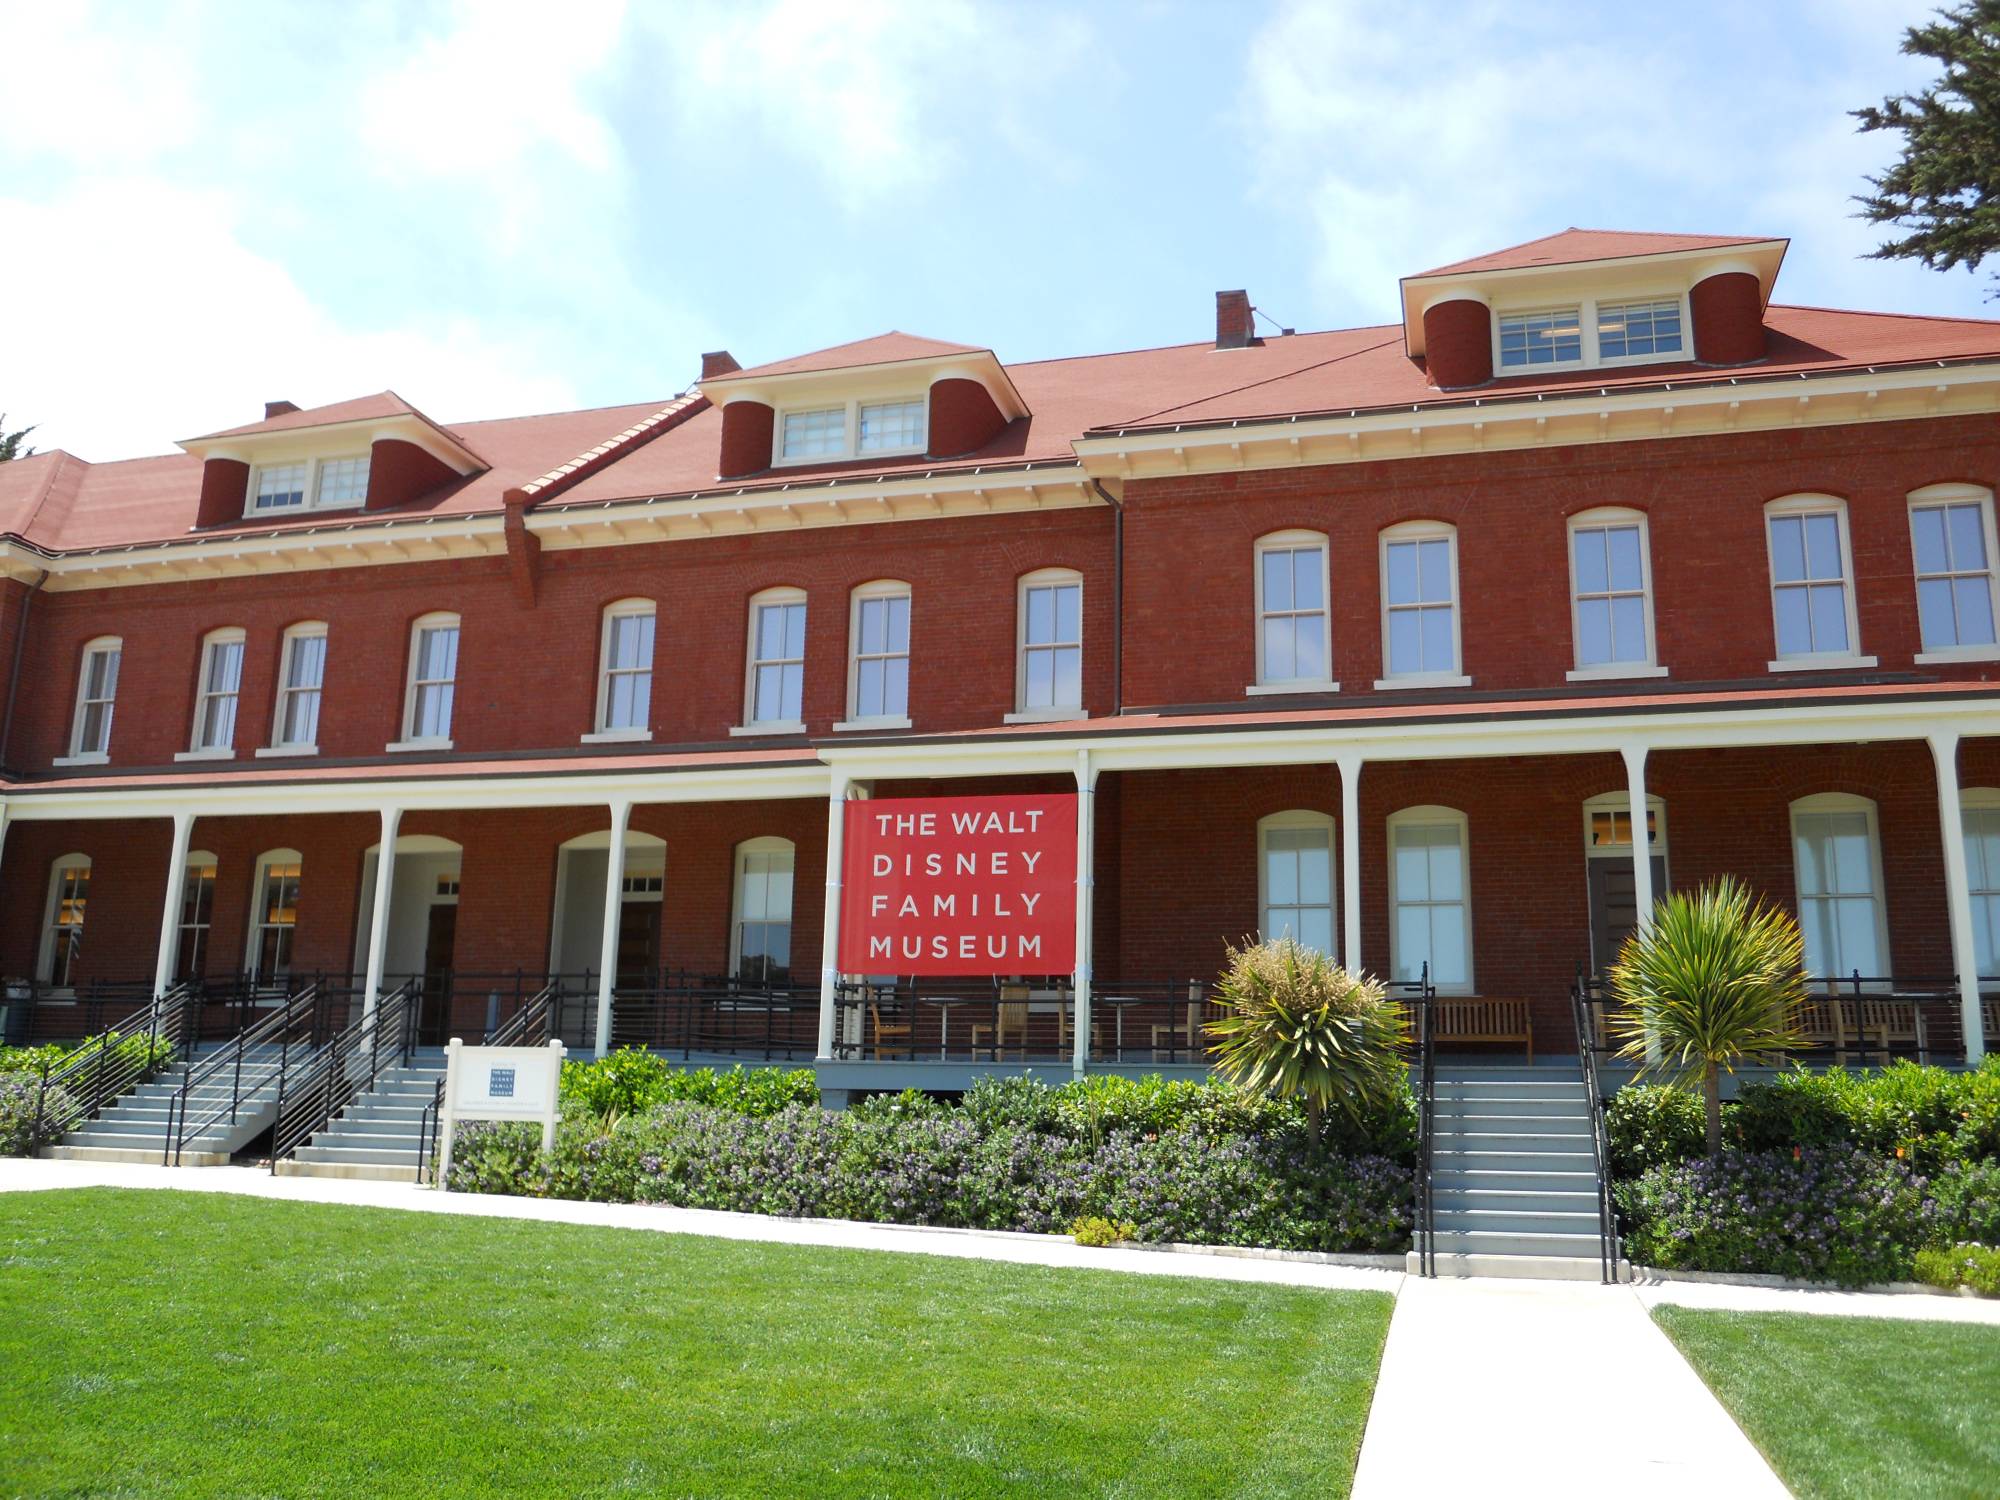 Learn more about Walt Disney at the Walt Disney Family Museum |PassPorter.com